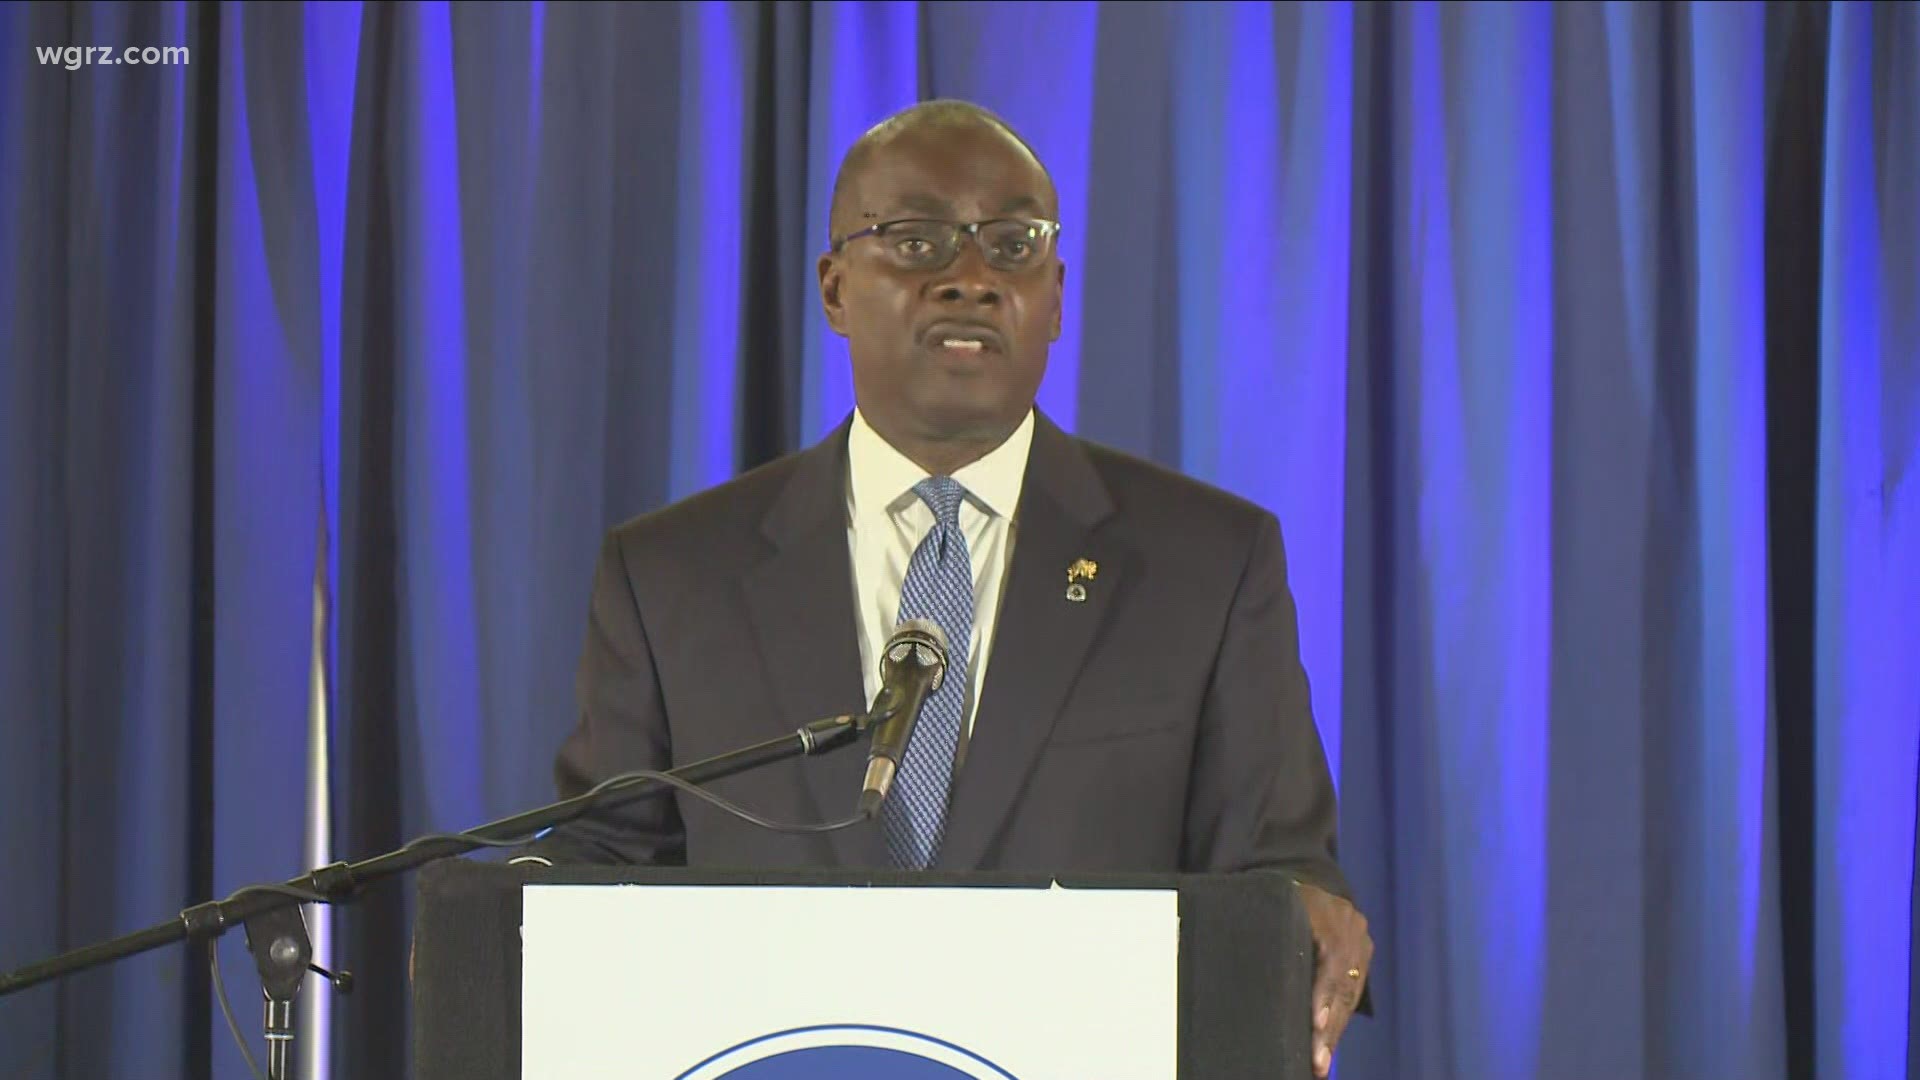 A new campaign finance report for Mayor Byron Brown shows a thinning number of large donations after his shocking defeat on primary night.